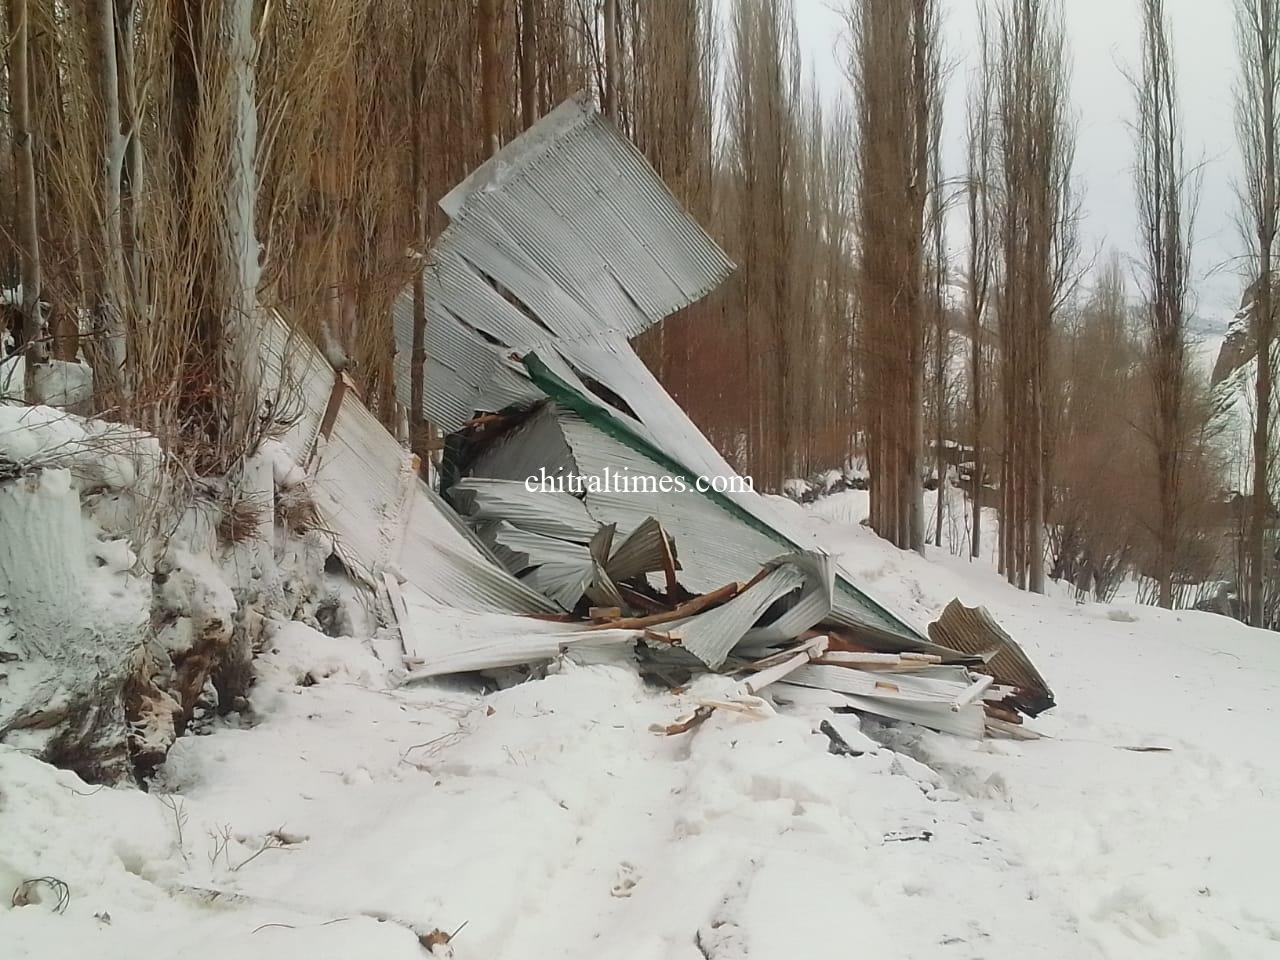 chitraltimes torkhow rech avalanch hit a house 4